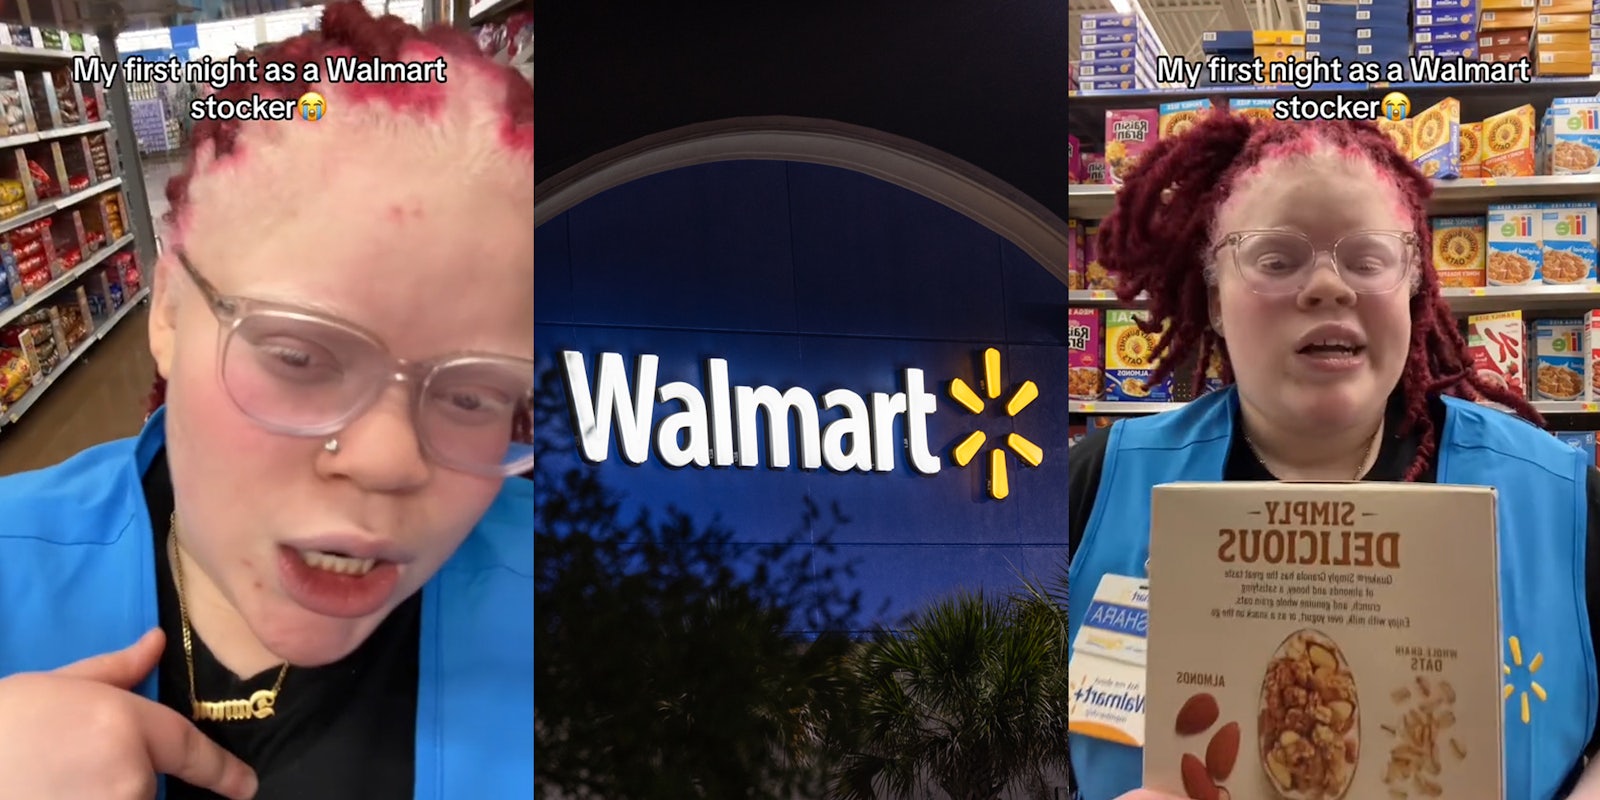 Walmart employee speaking with caption 'My first night as a Walmart stocker' (l) Walmart sign at night (c) Walmart employee speaking with caption 'My first night as a Walmart stocker' (r)